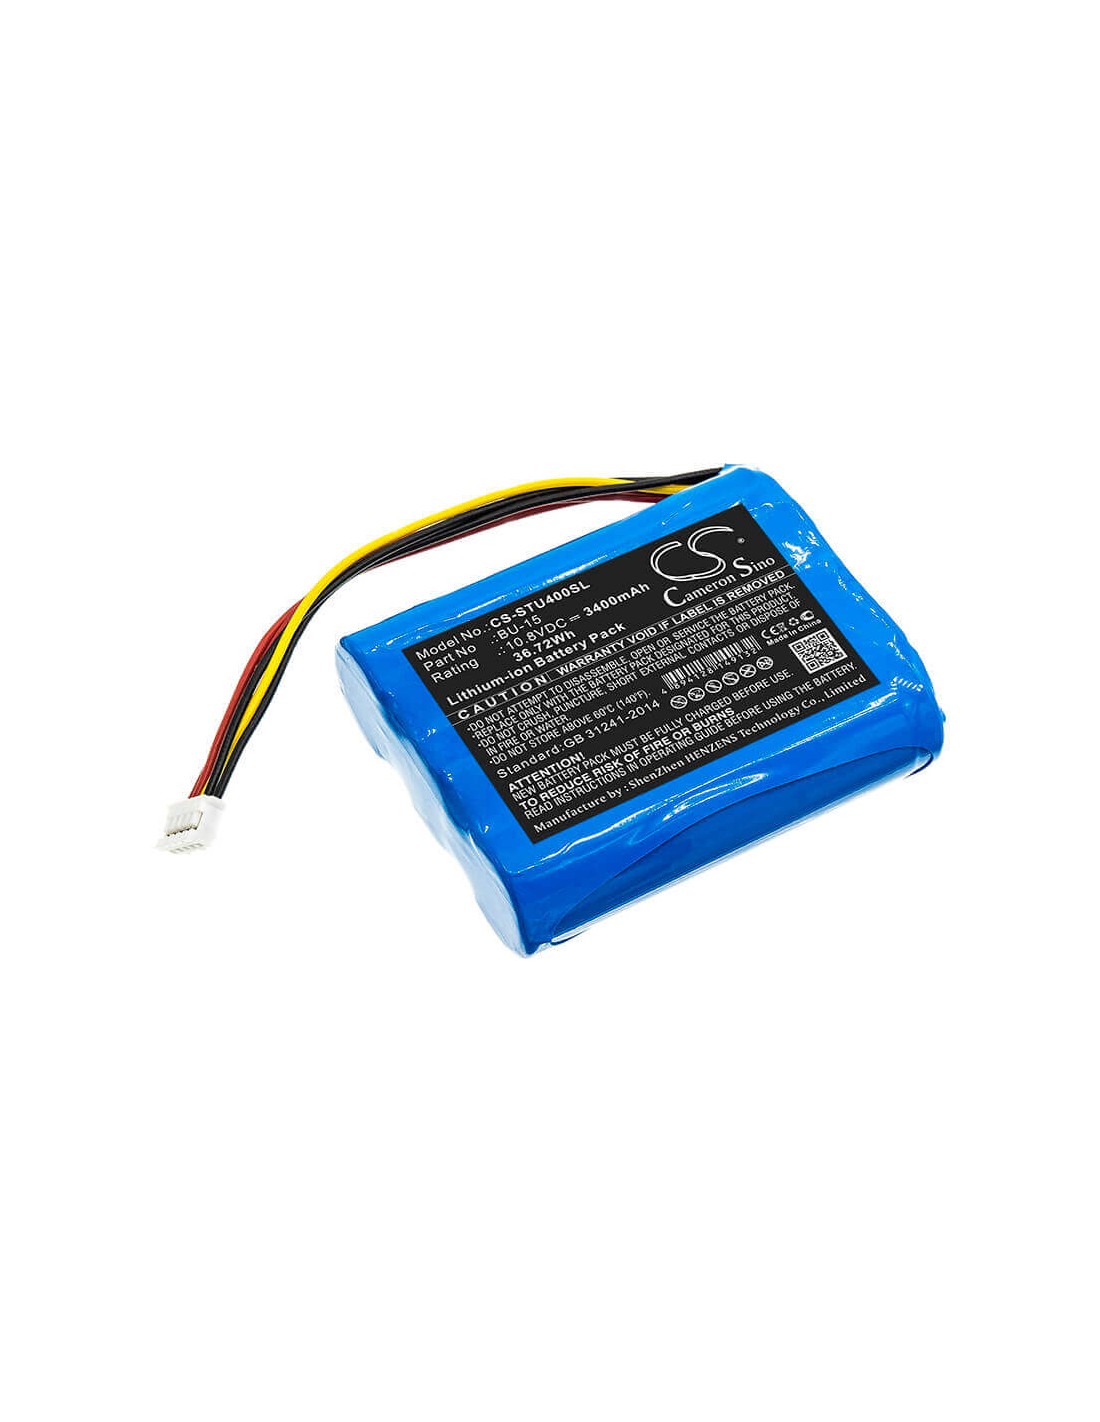 Battery for Sumitomo, T400s, T-400s, 10.8V, 3400mAh - 36.72Wh